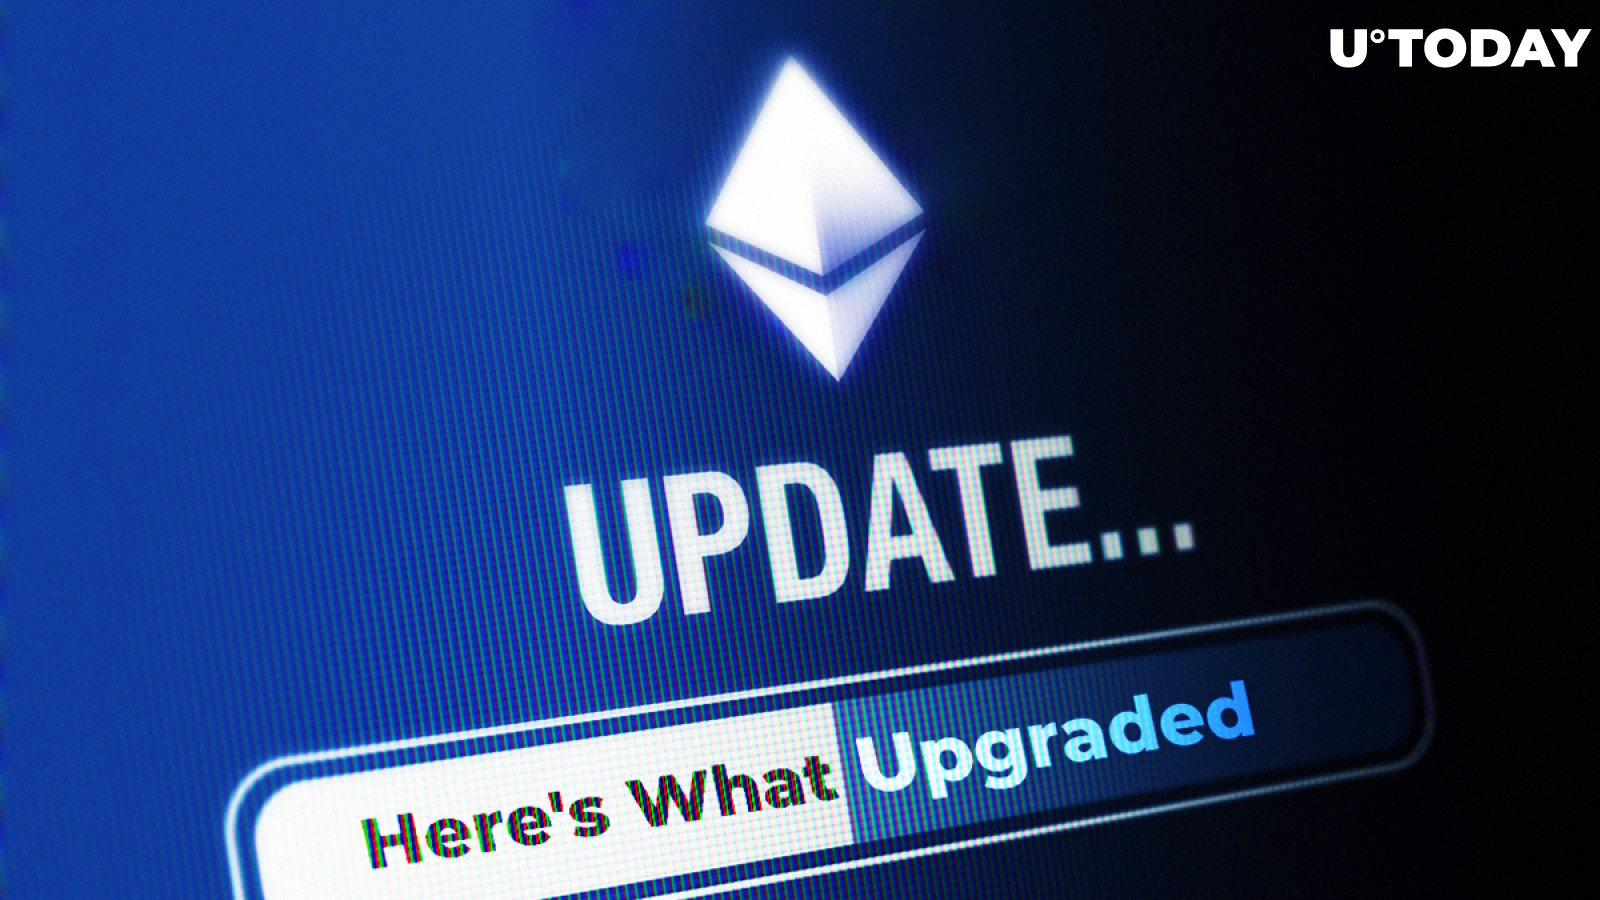 Ethereum (ETH) Geth Client New Version: Here's What They Upgraded